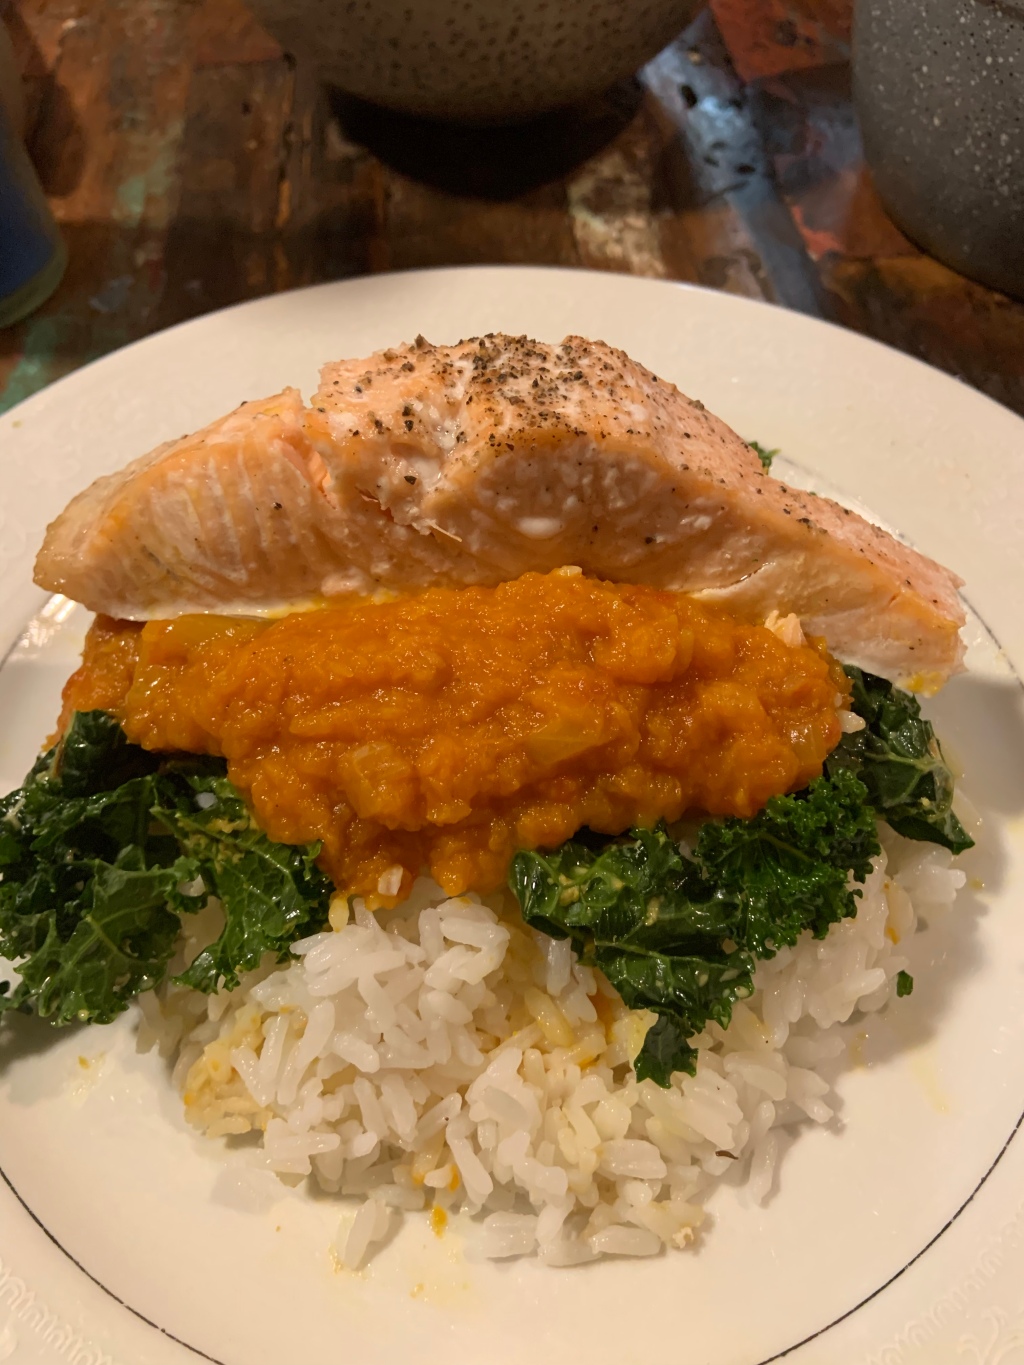 Baked Salmon with Turmeric-spiced Tomato-Squash Bisque and Coconut Rice